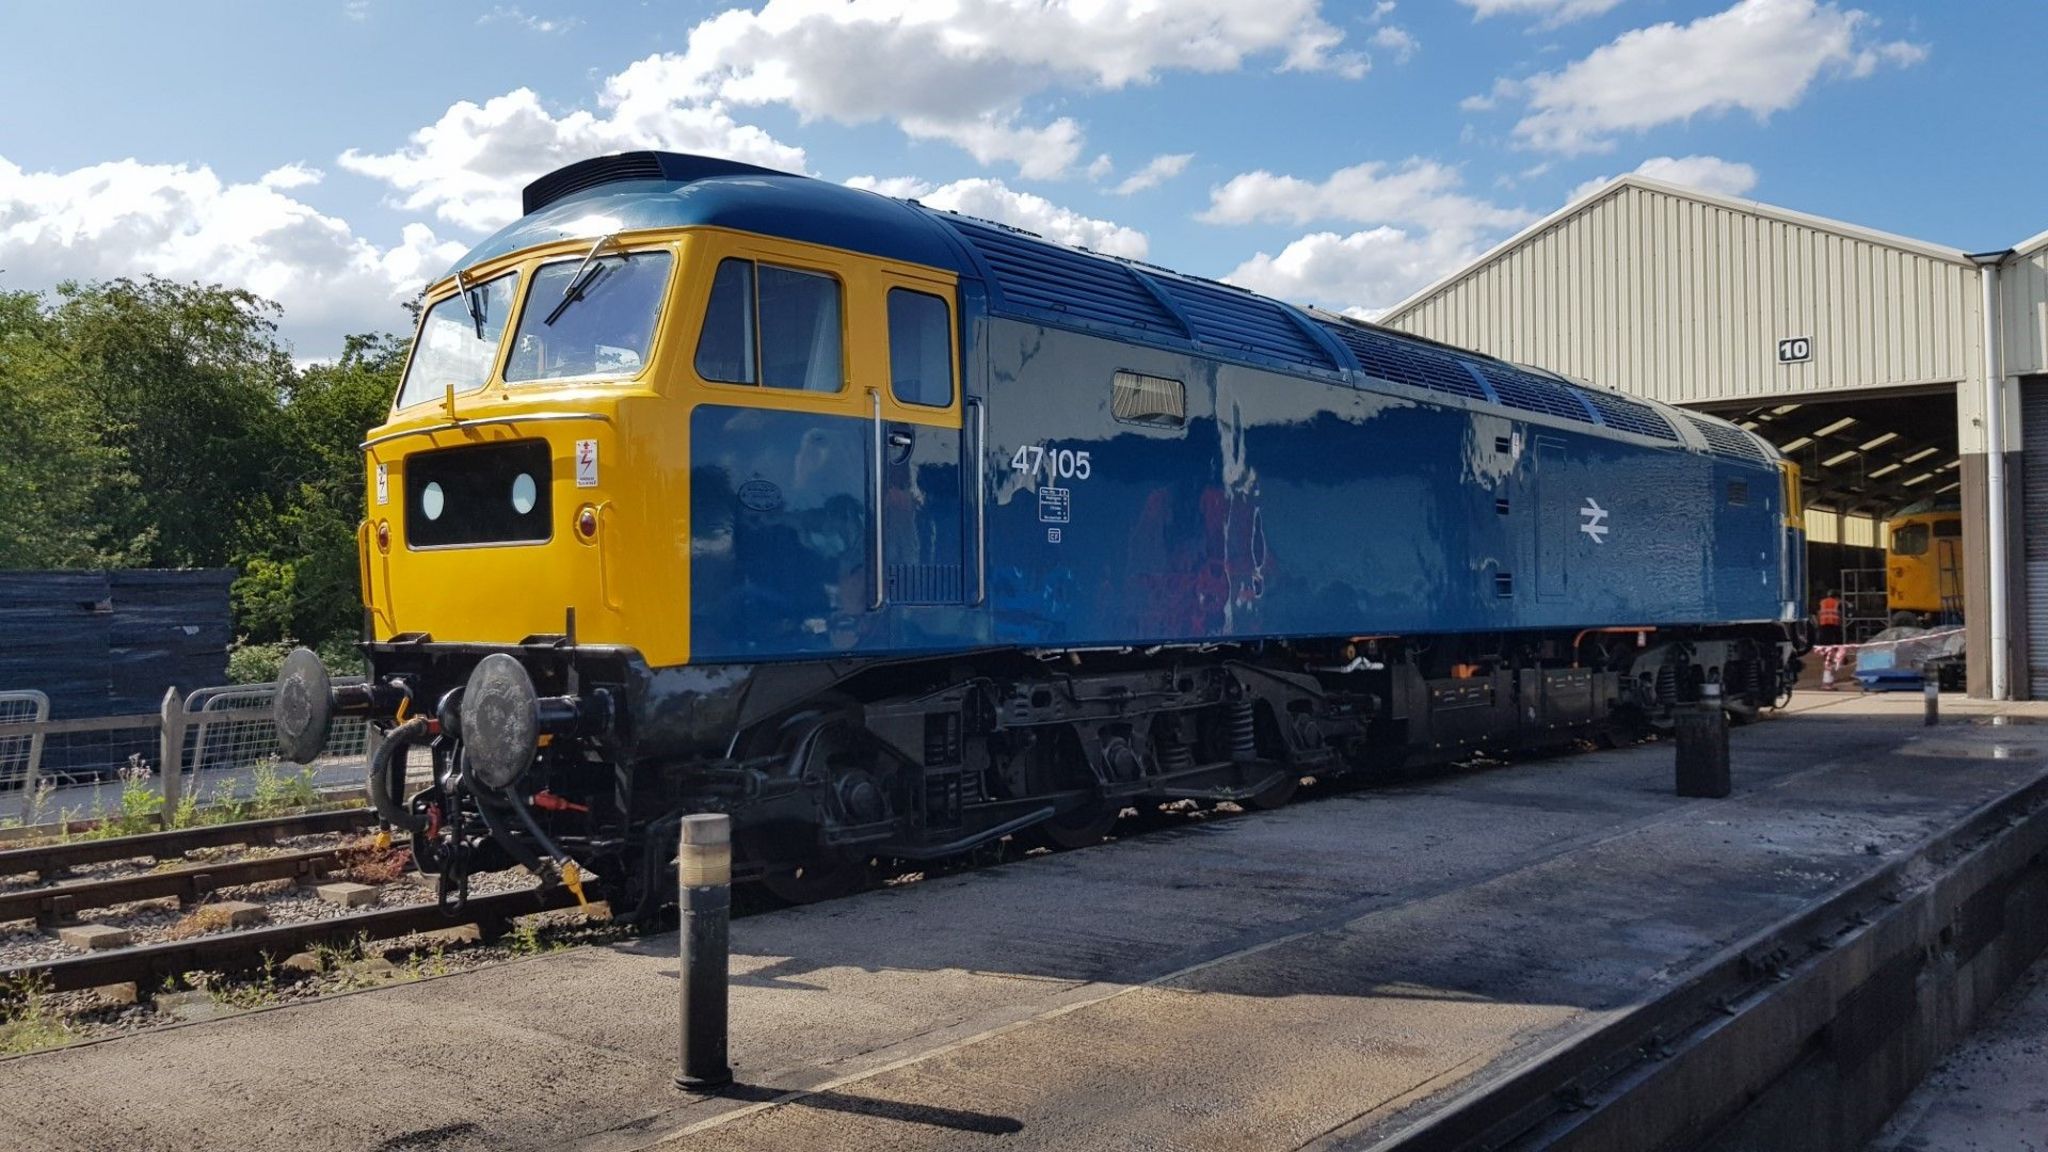 A bright blue and yellow old-fashioned train in a shed.